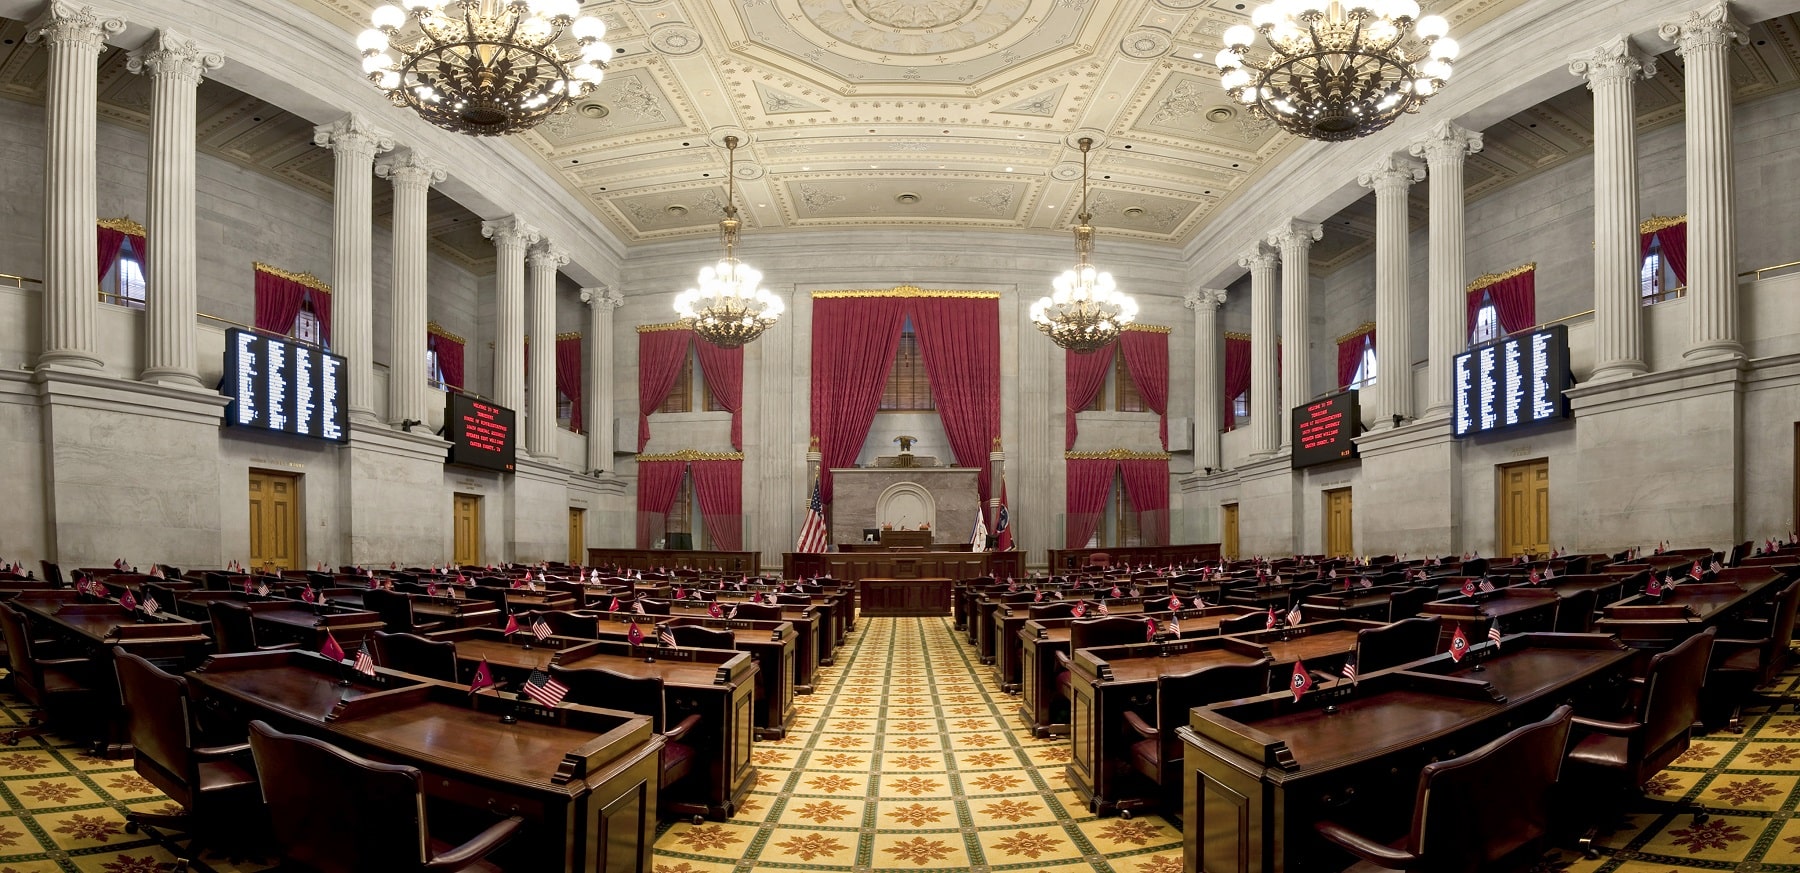 stock photo of TN State Capitol